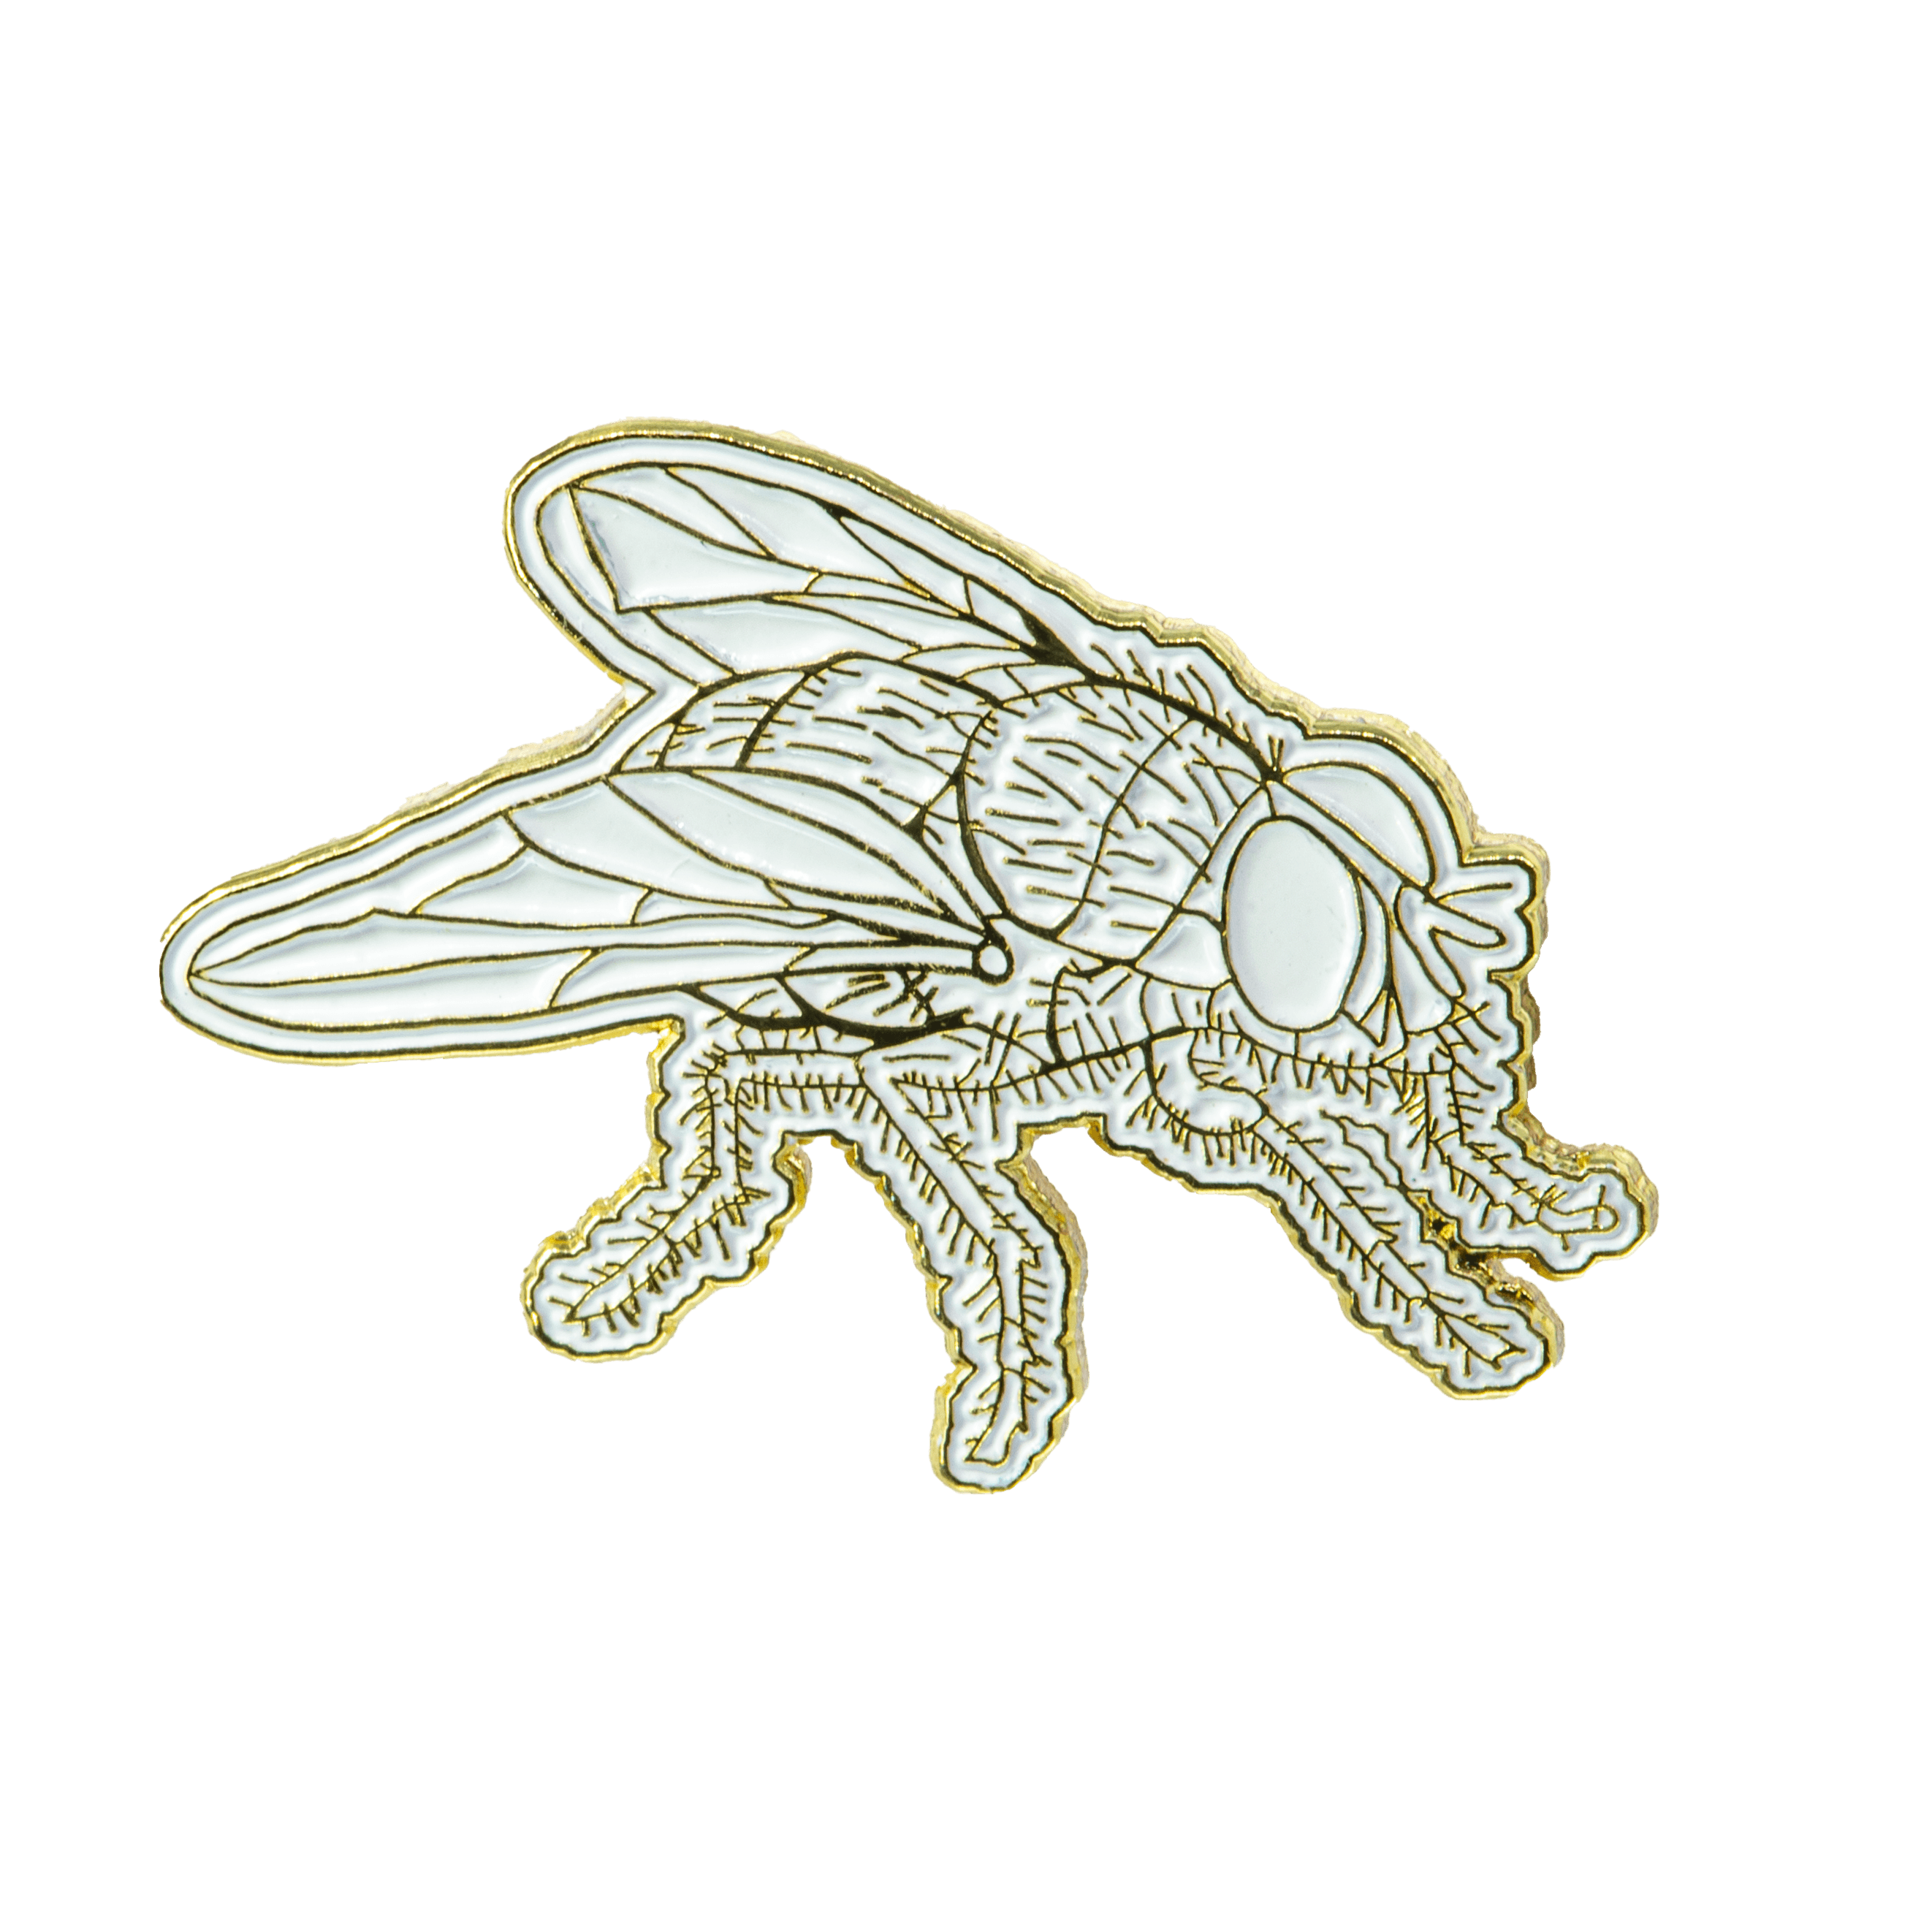 Fly Enamel Pin - Whiteout by The Roving House